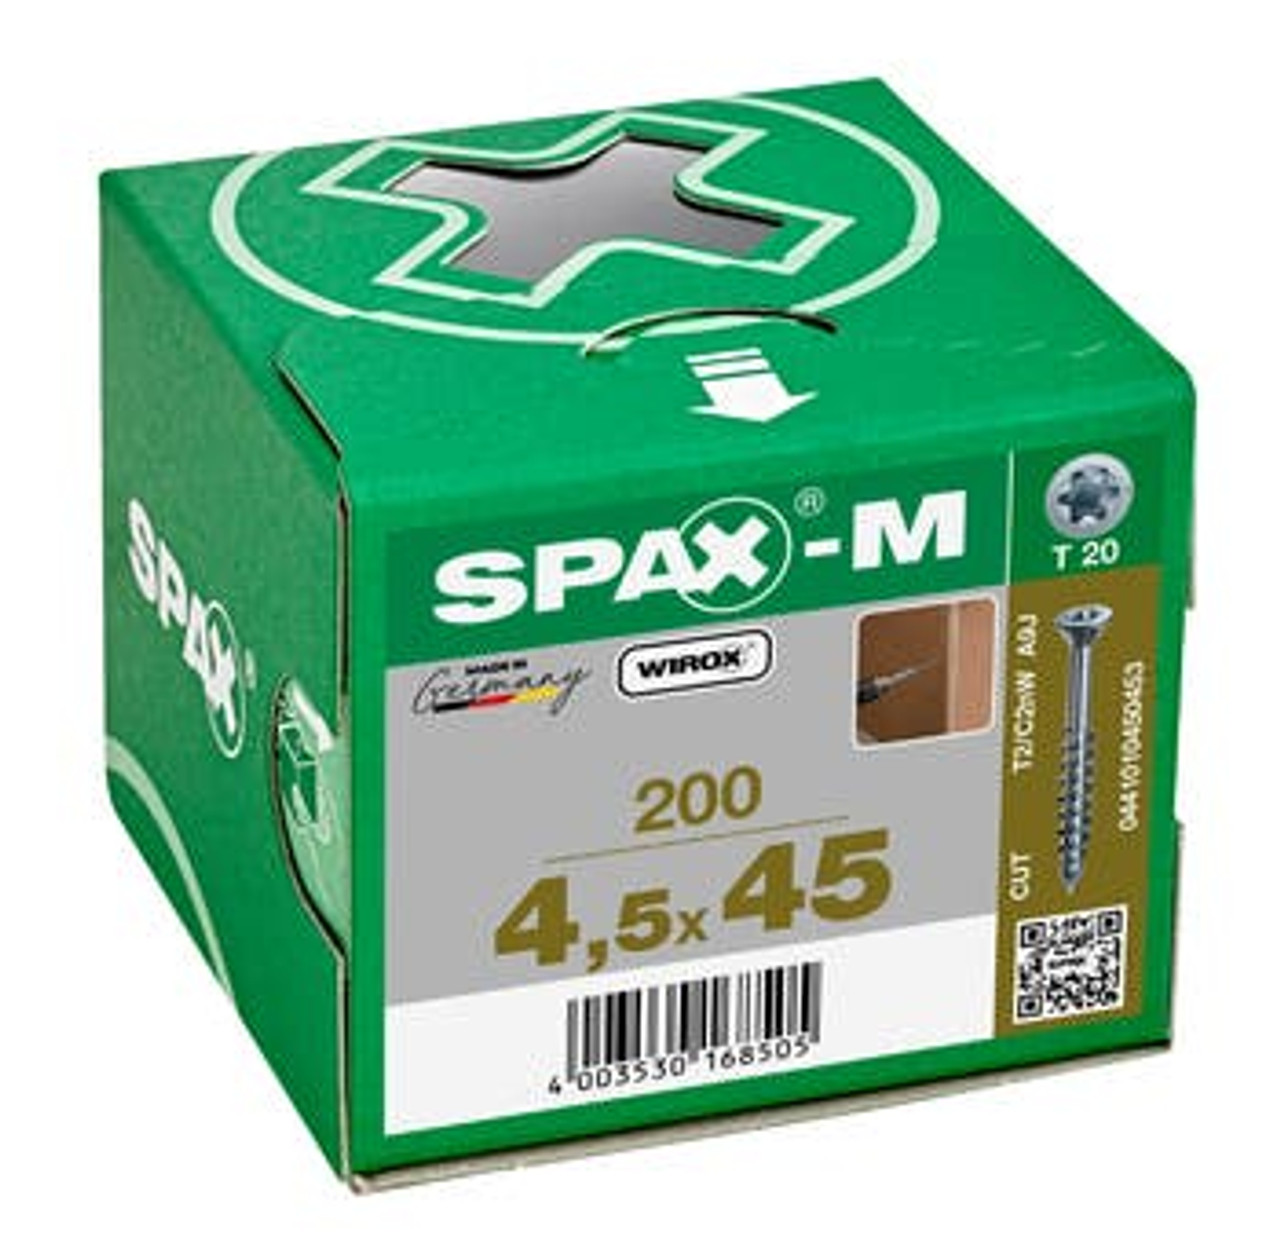 SPAX MDF Screws | 4.5mm T20 Countersunk Head MDF Screws with Partial Thread in WIROX